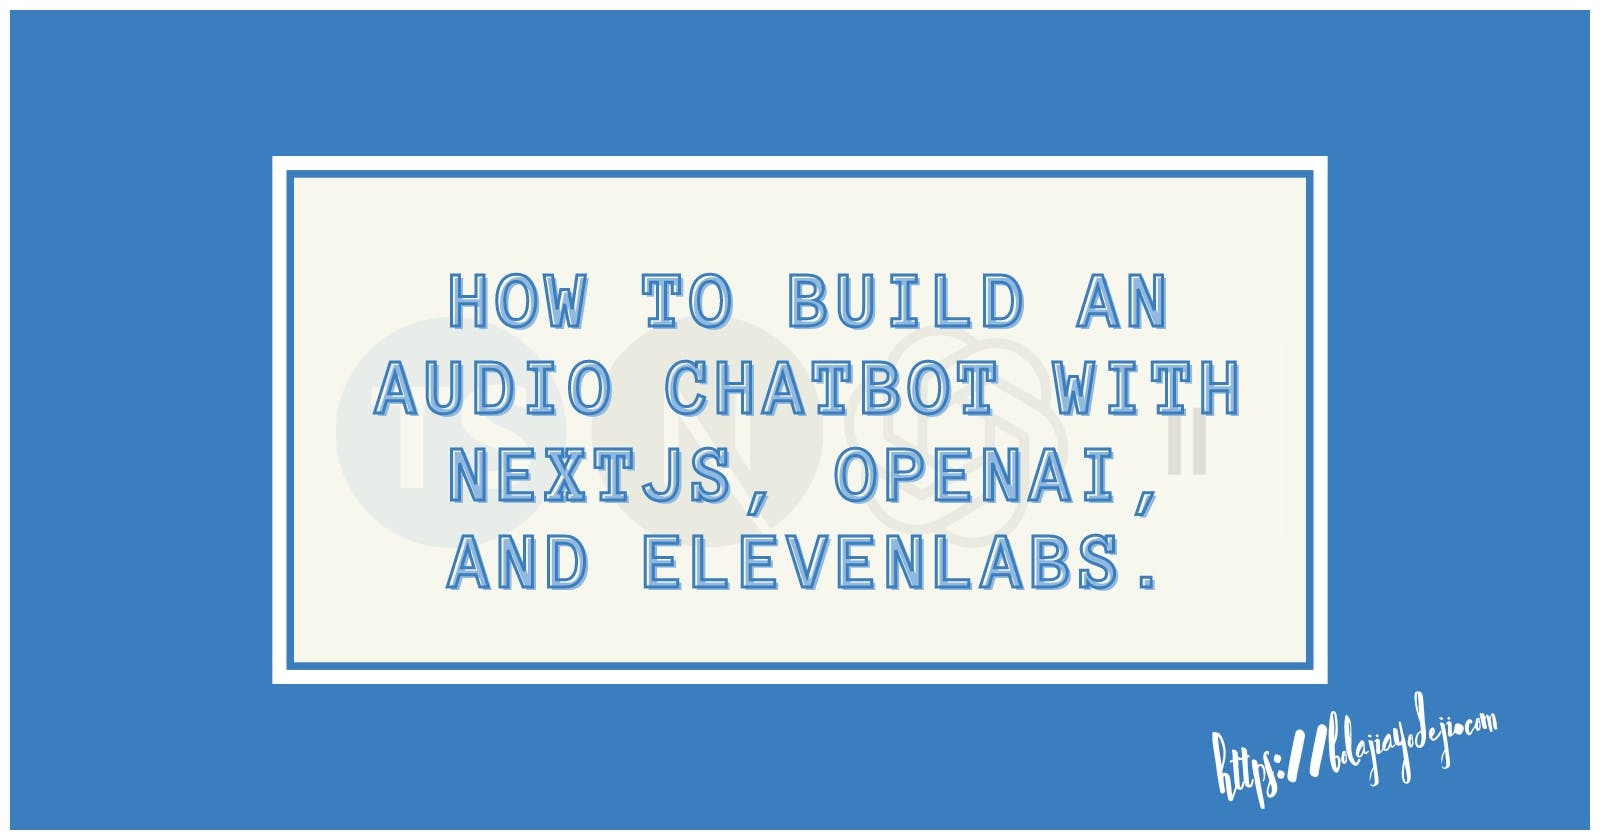 How to Build an Audio Chatbot with Nextjs, OpenAI, and ElevenLabs